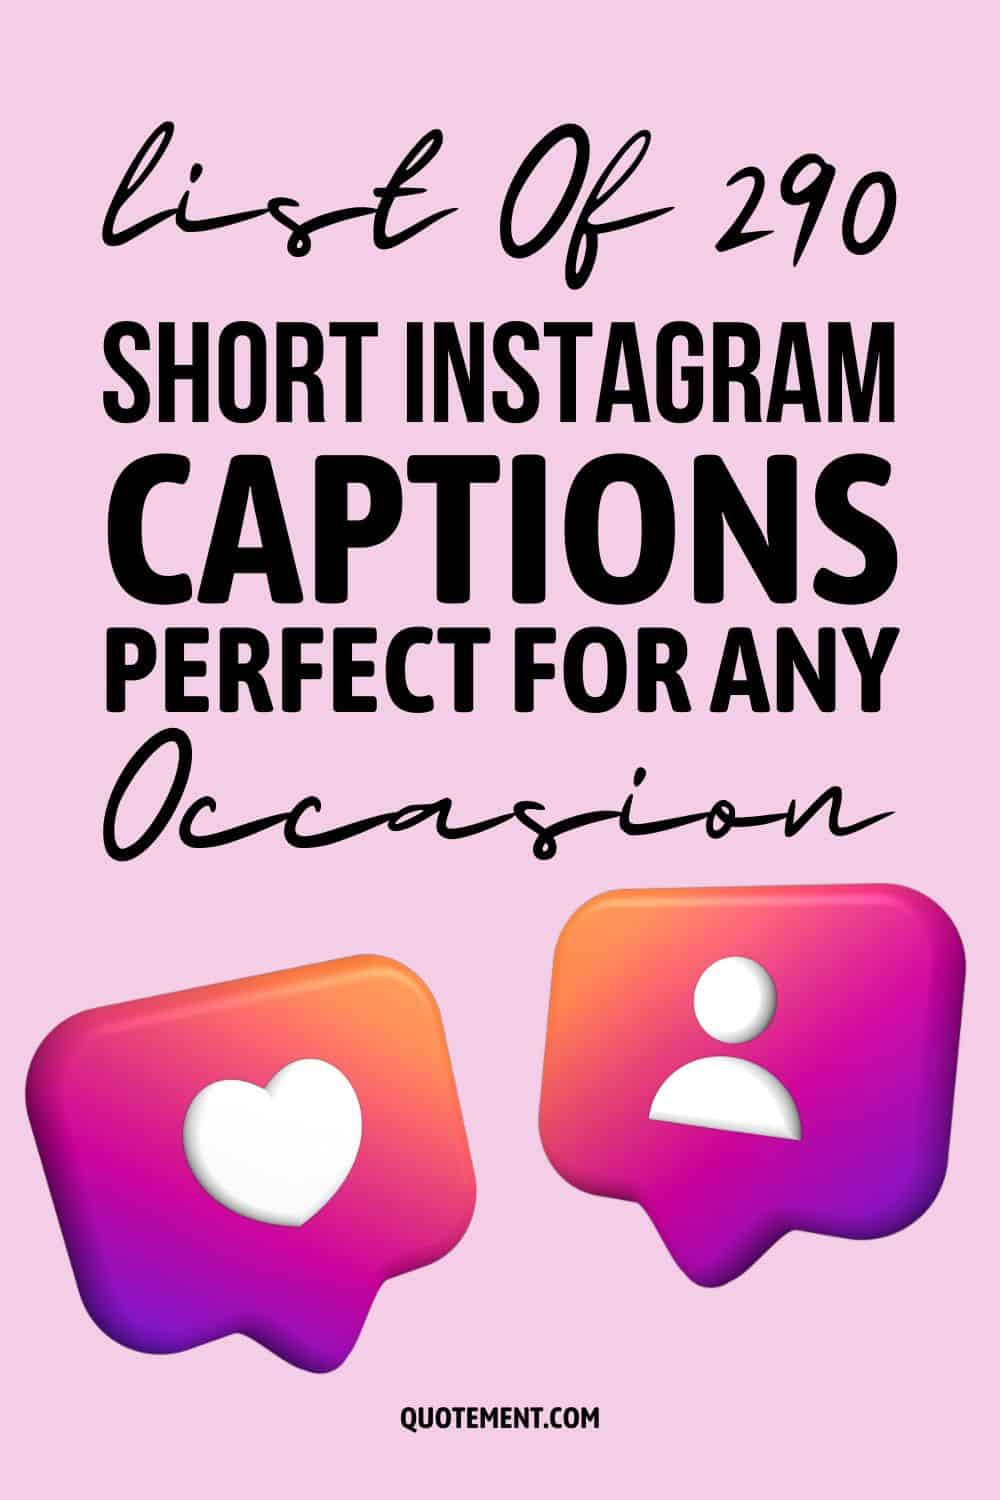 List Of 290 Short Instagram Captions Perfect For Any Occasion
